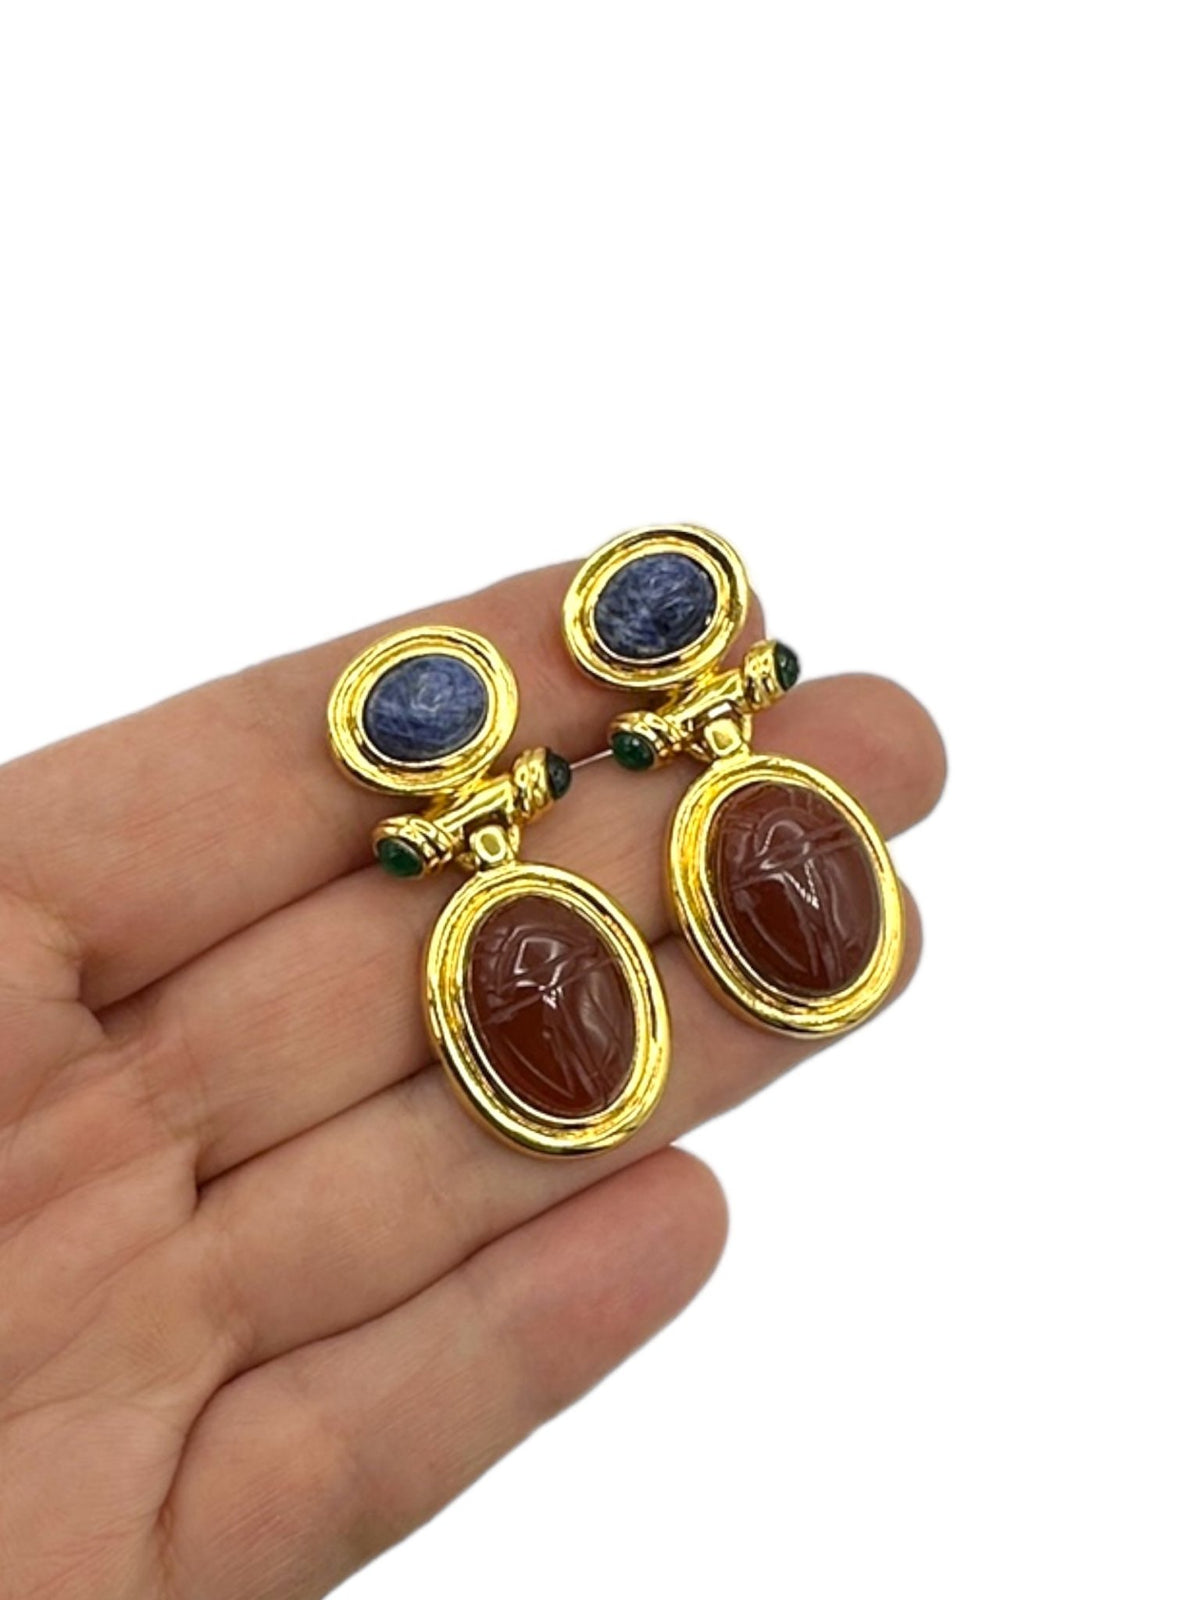 Carnelian Sodalite Scarab Cabachon Egyptian Revival Dangle Drop Gold Clip-on Earrings - 24 Wishes Vintage Jewelry